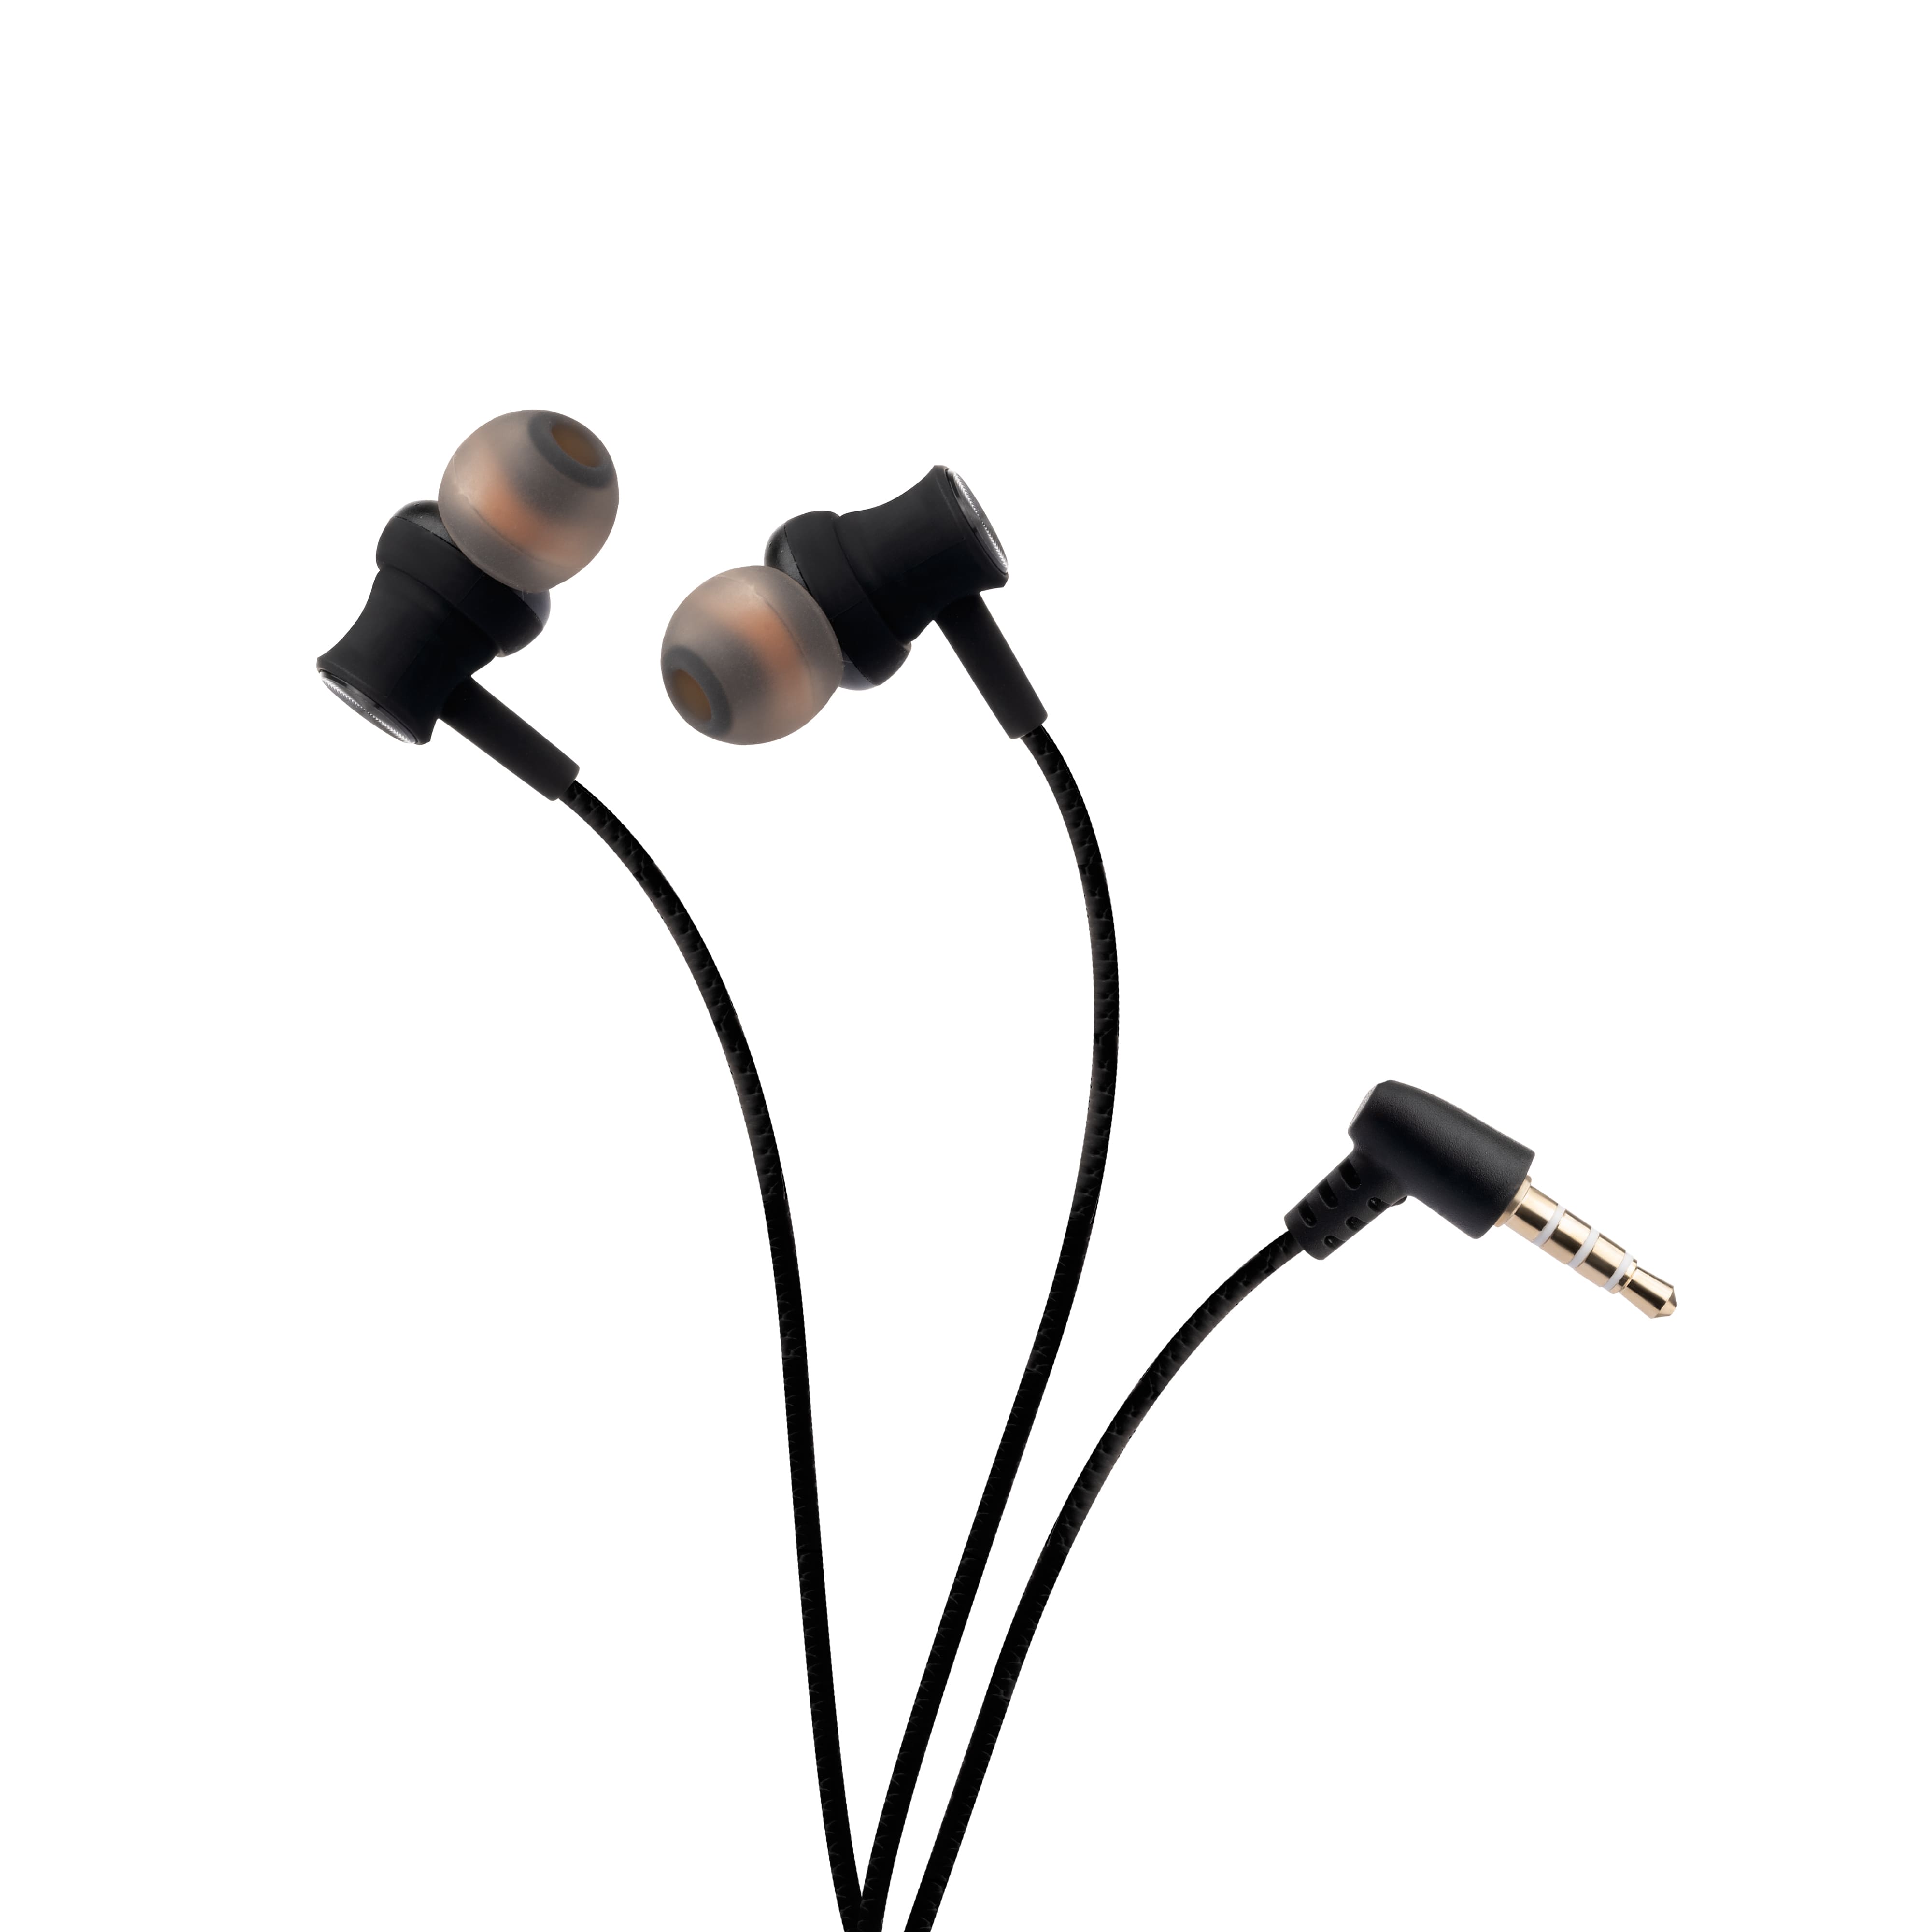 Lapcare WOOBUDS IV wired Earbuds with inbuilt MIC -Black (LBD-204)